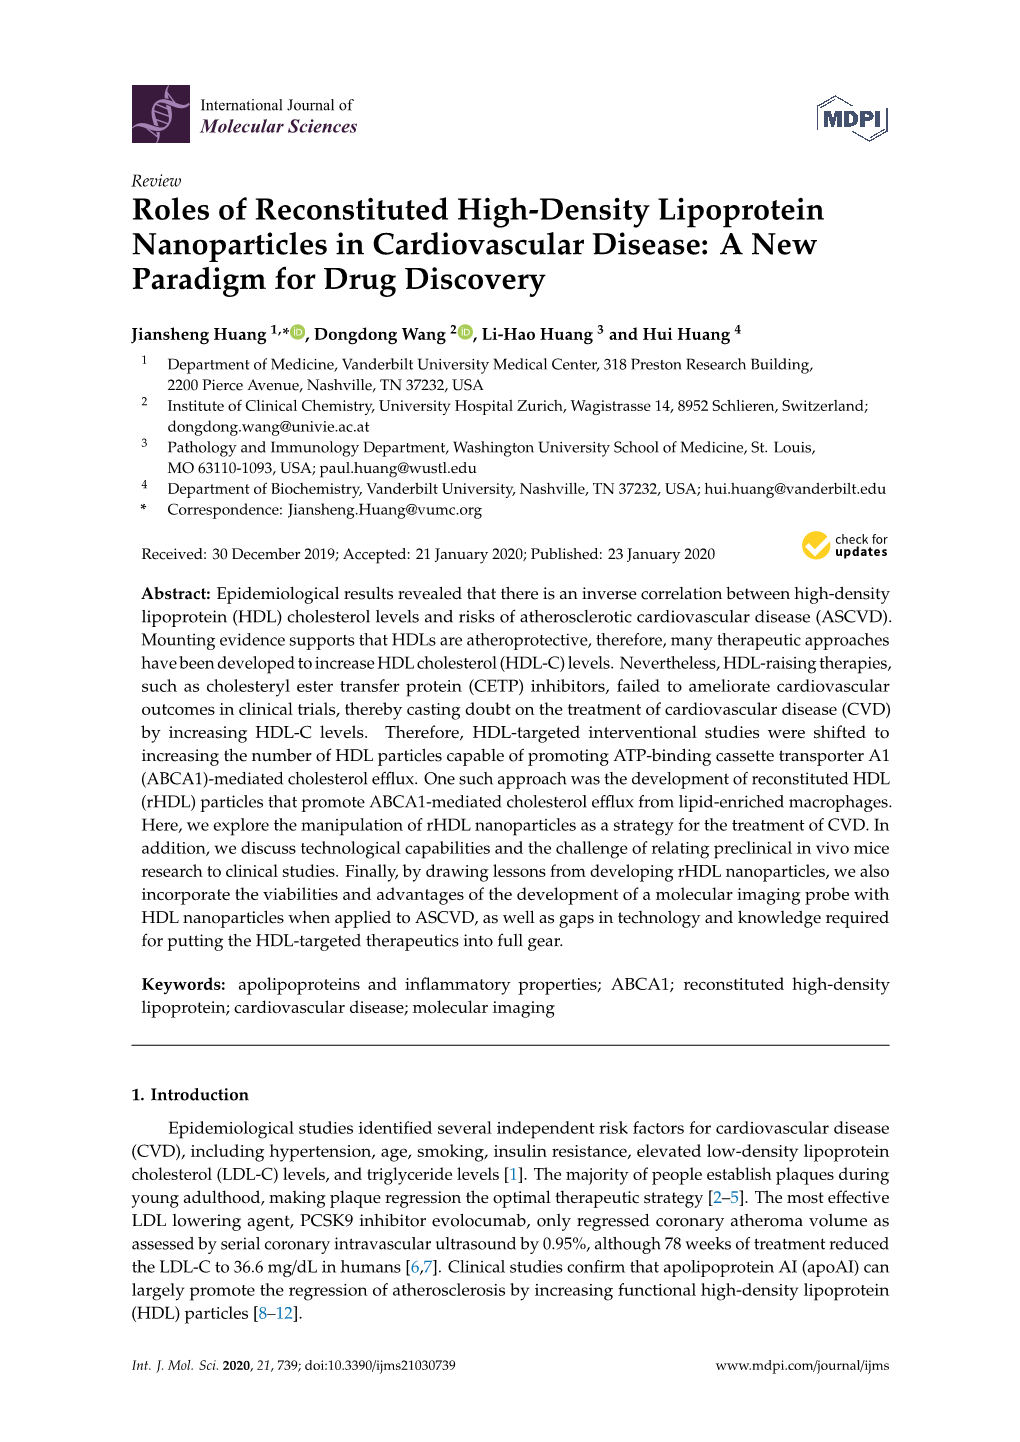 Roles of Reconstituted High-Density Lipoprotein Nanoparticles in Cardiovascular Disease: a New Paradigm for Drug Discovery